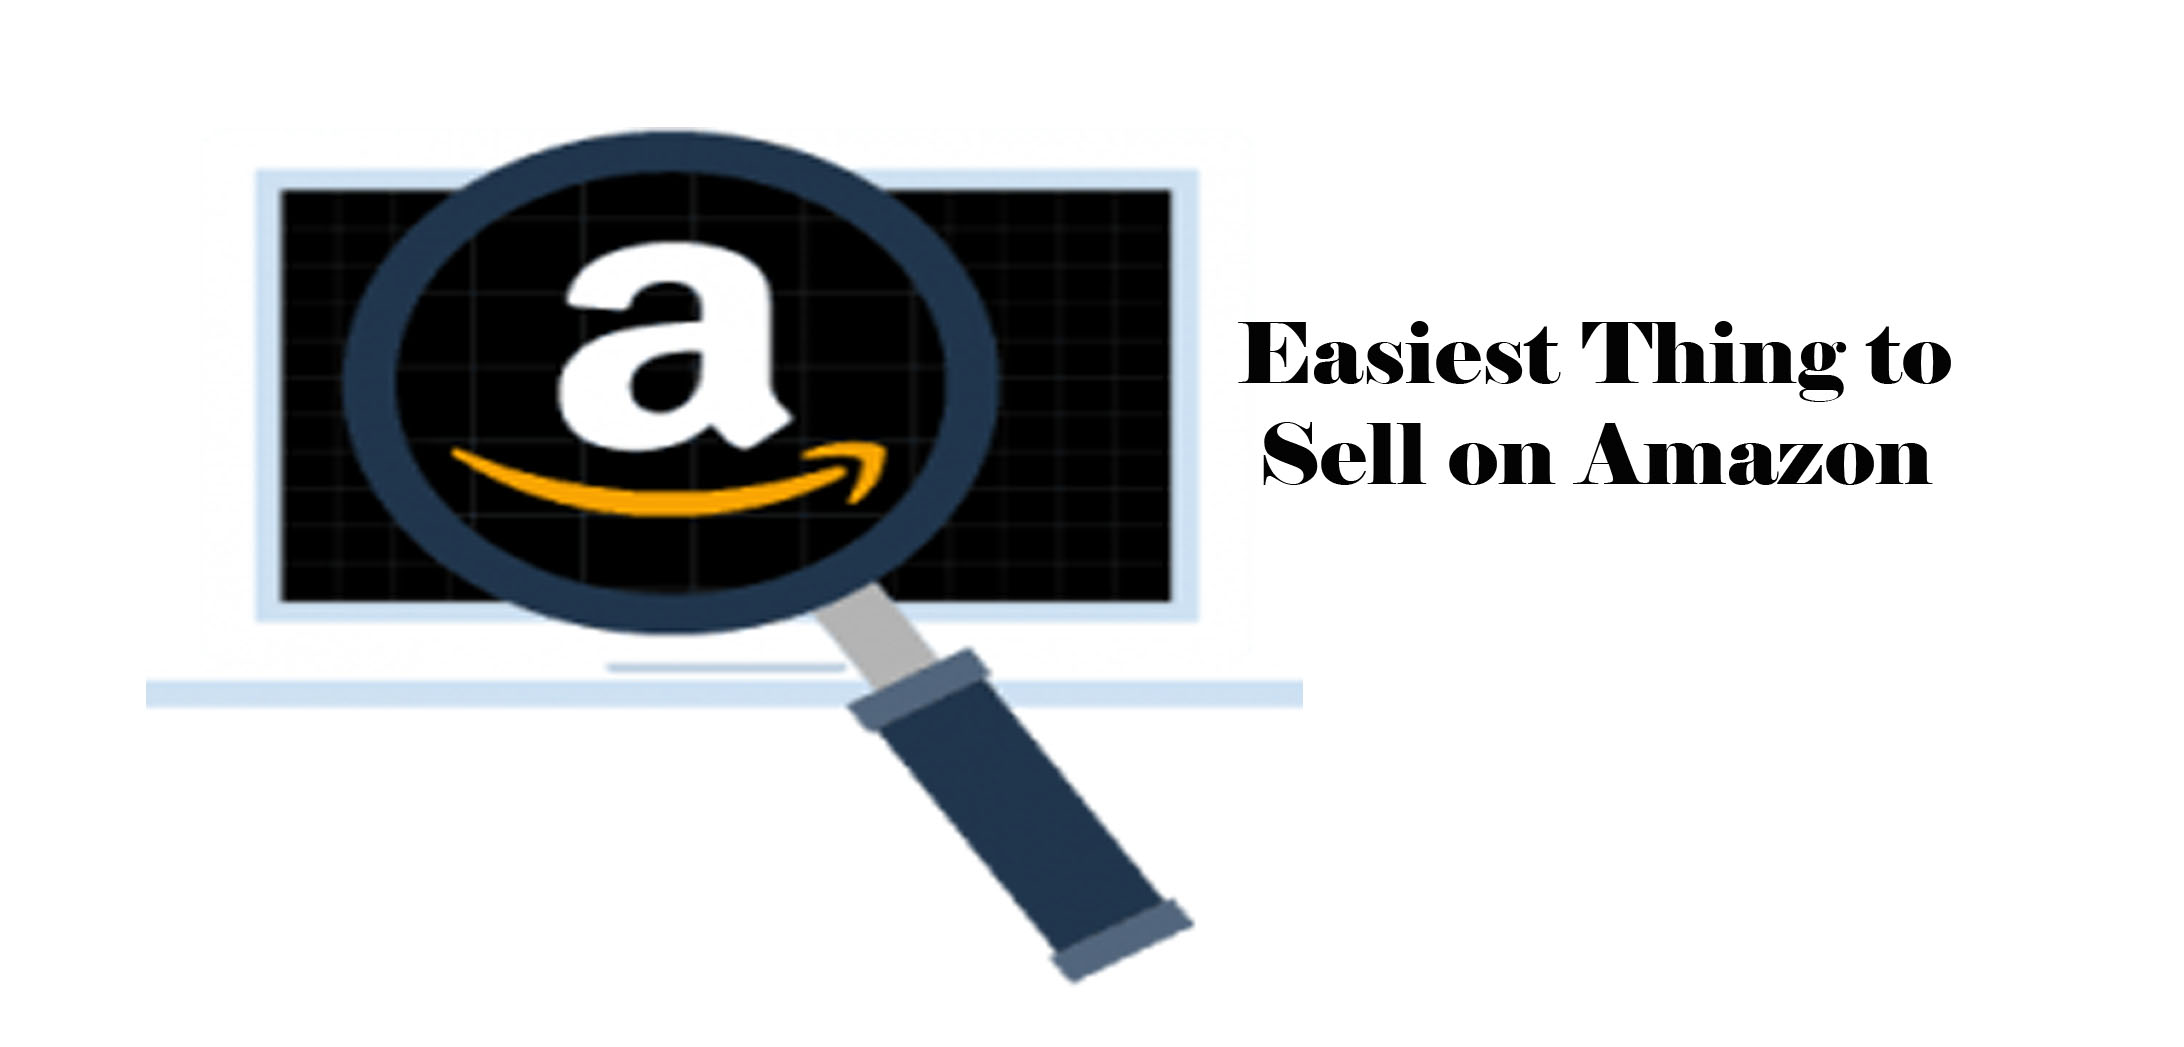 Easiest Thing to Sell on Amazon - Sell on Amazon How to